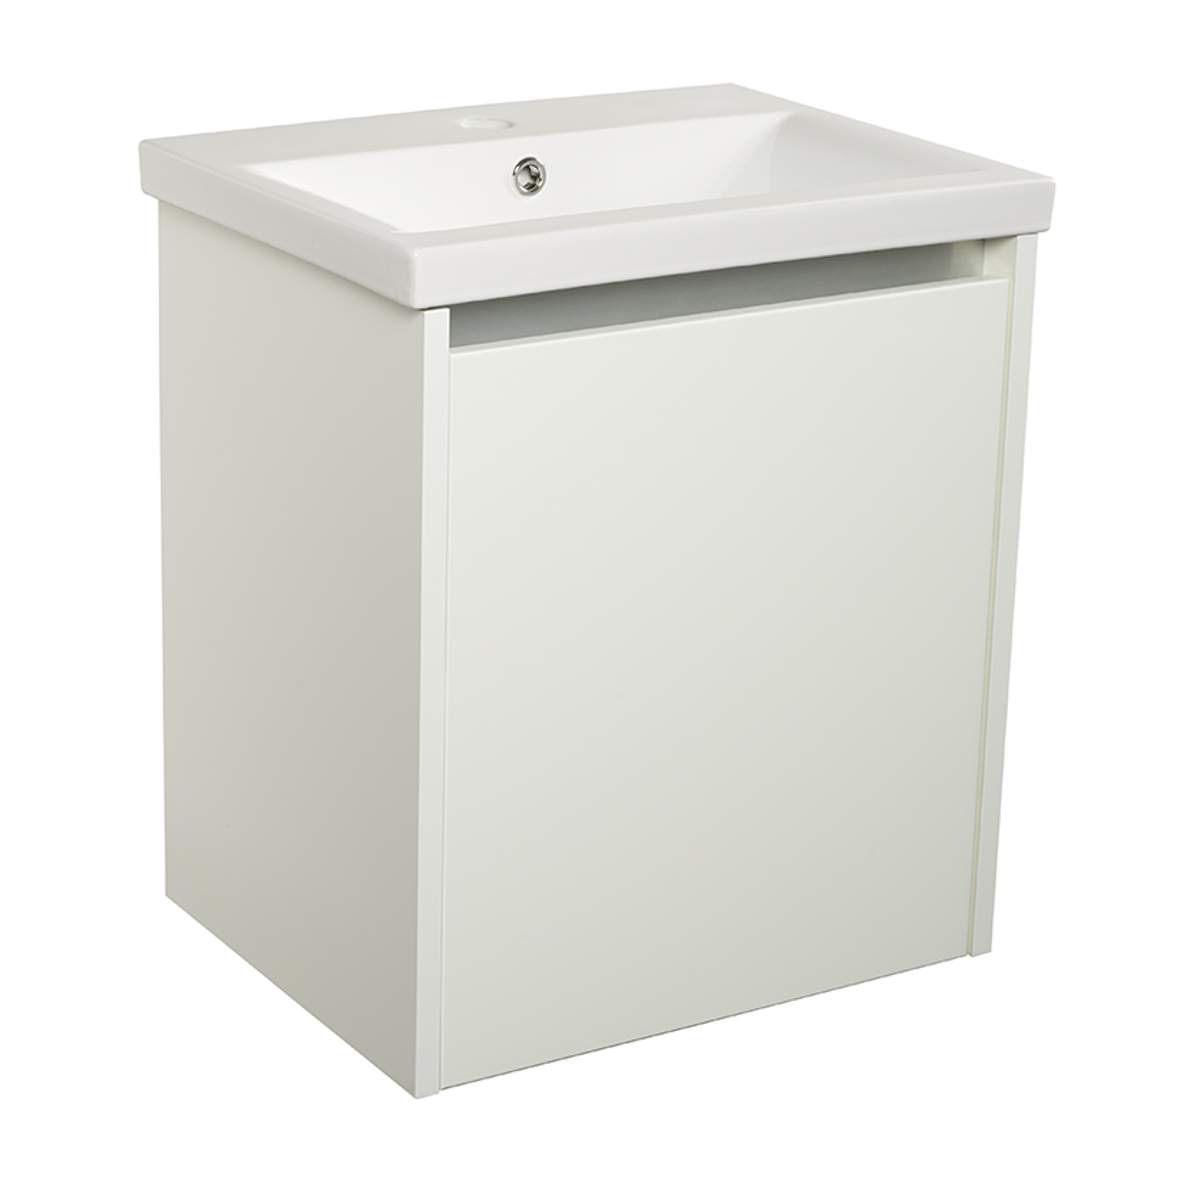 JTP City 500 with Internal Drawer, Sensor and Bottom Light in White (CYWM503W+P500BS)